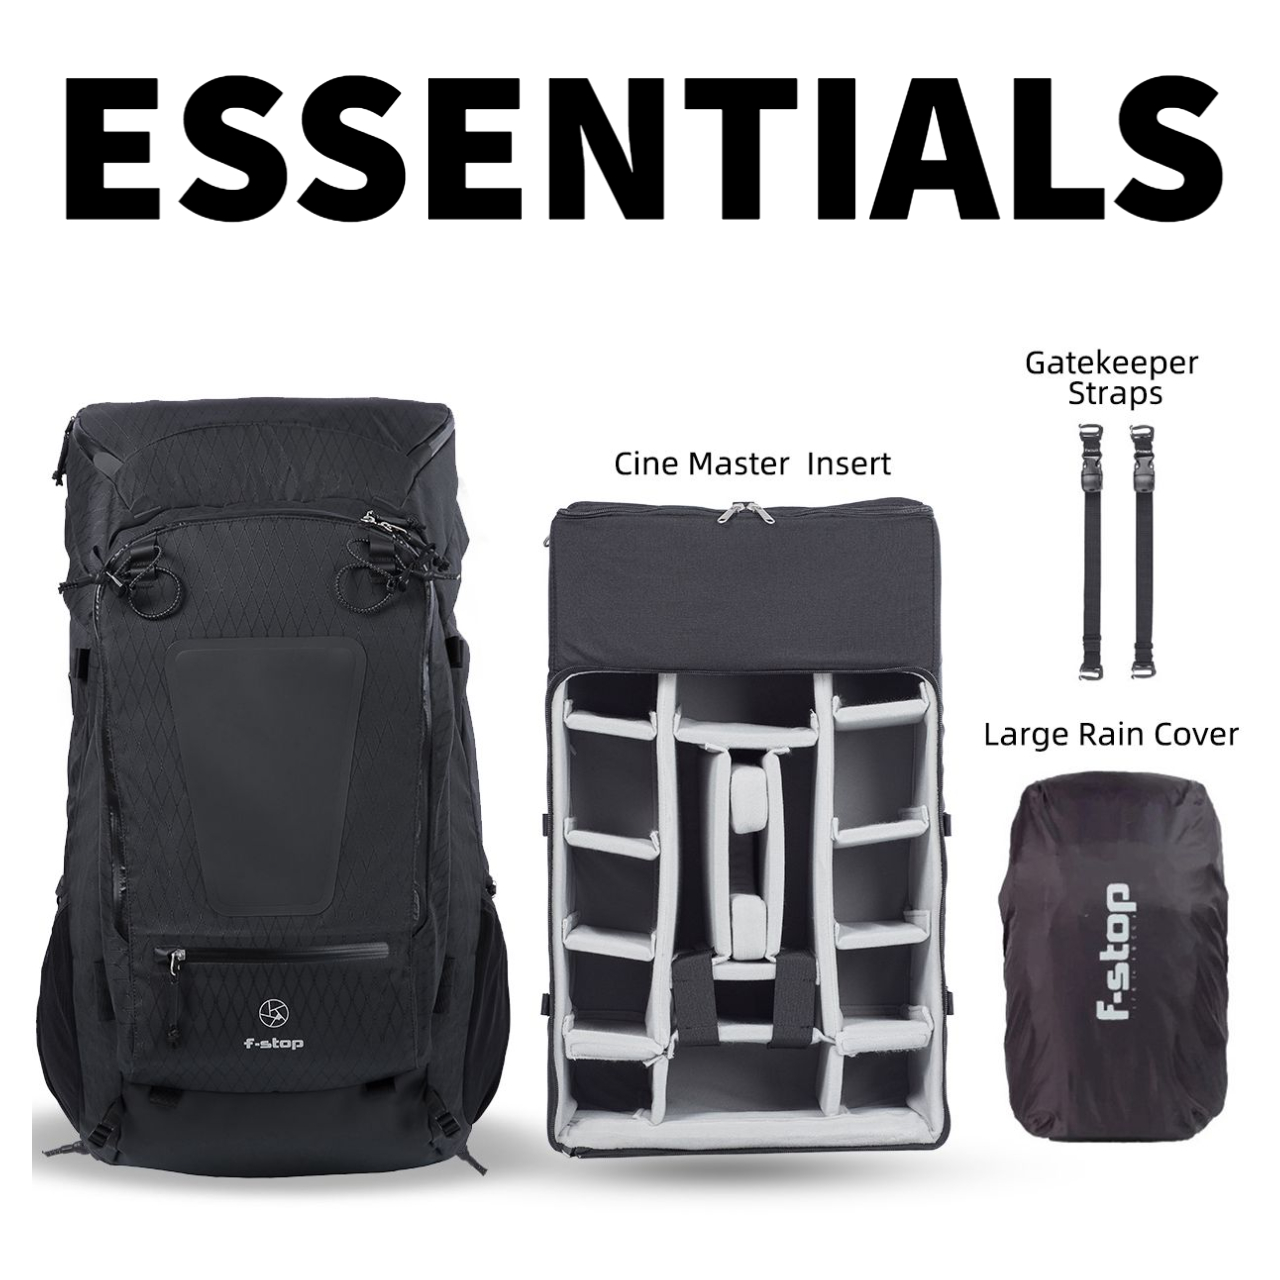 f-stop SHINN DuraDiamond® 80 liter adventure and camera backpack essentials bundle in the Anthracite Black color